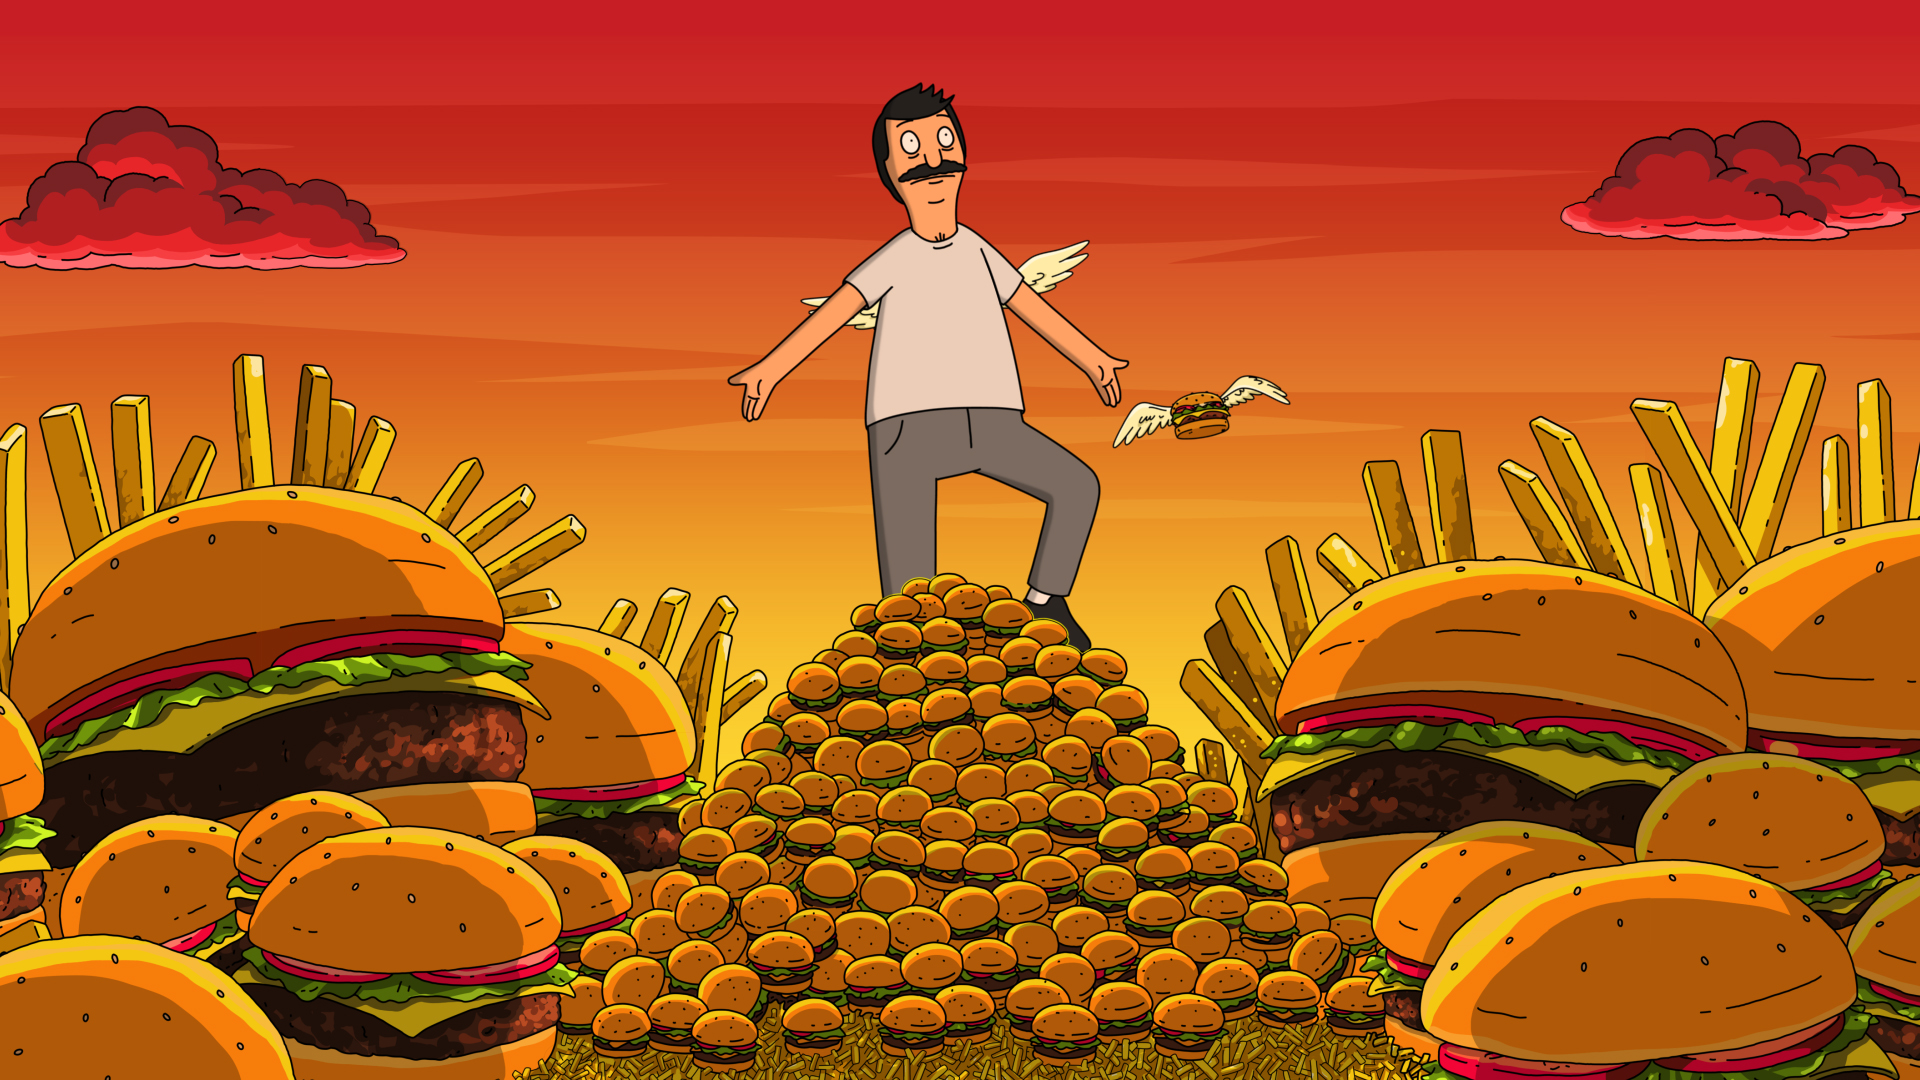 Bob Belcher in a daydream episode standing on a pile of burgers with a flying burger behind him.